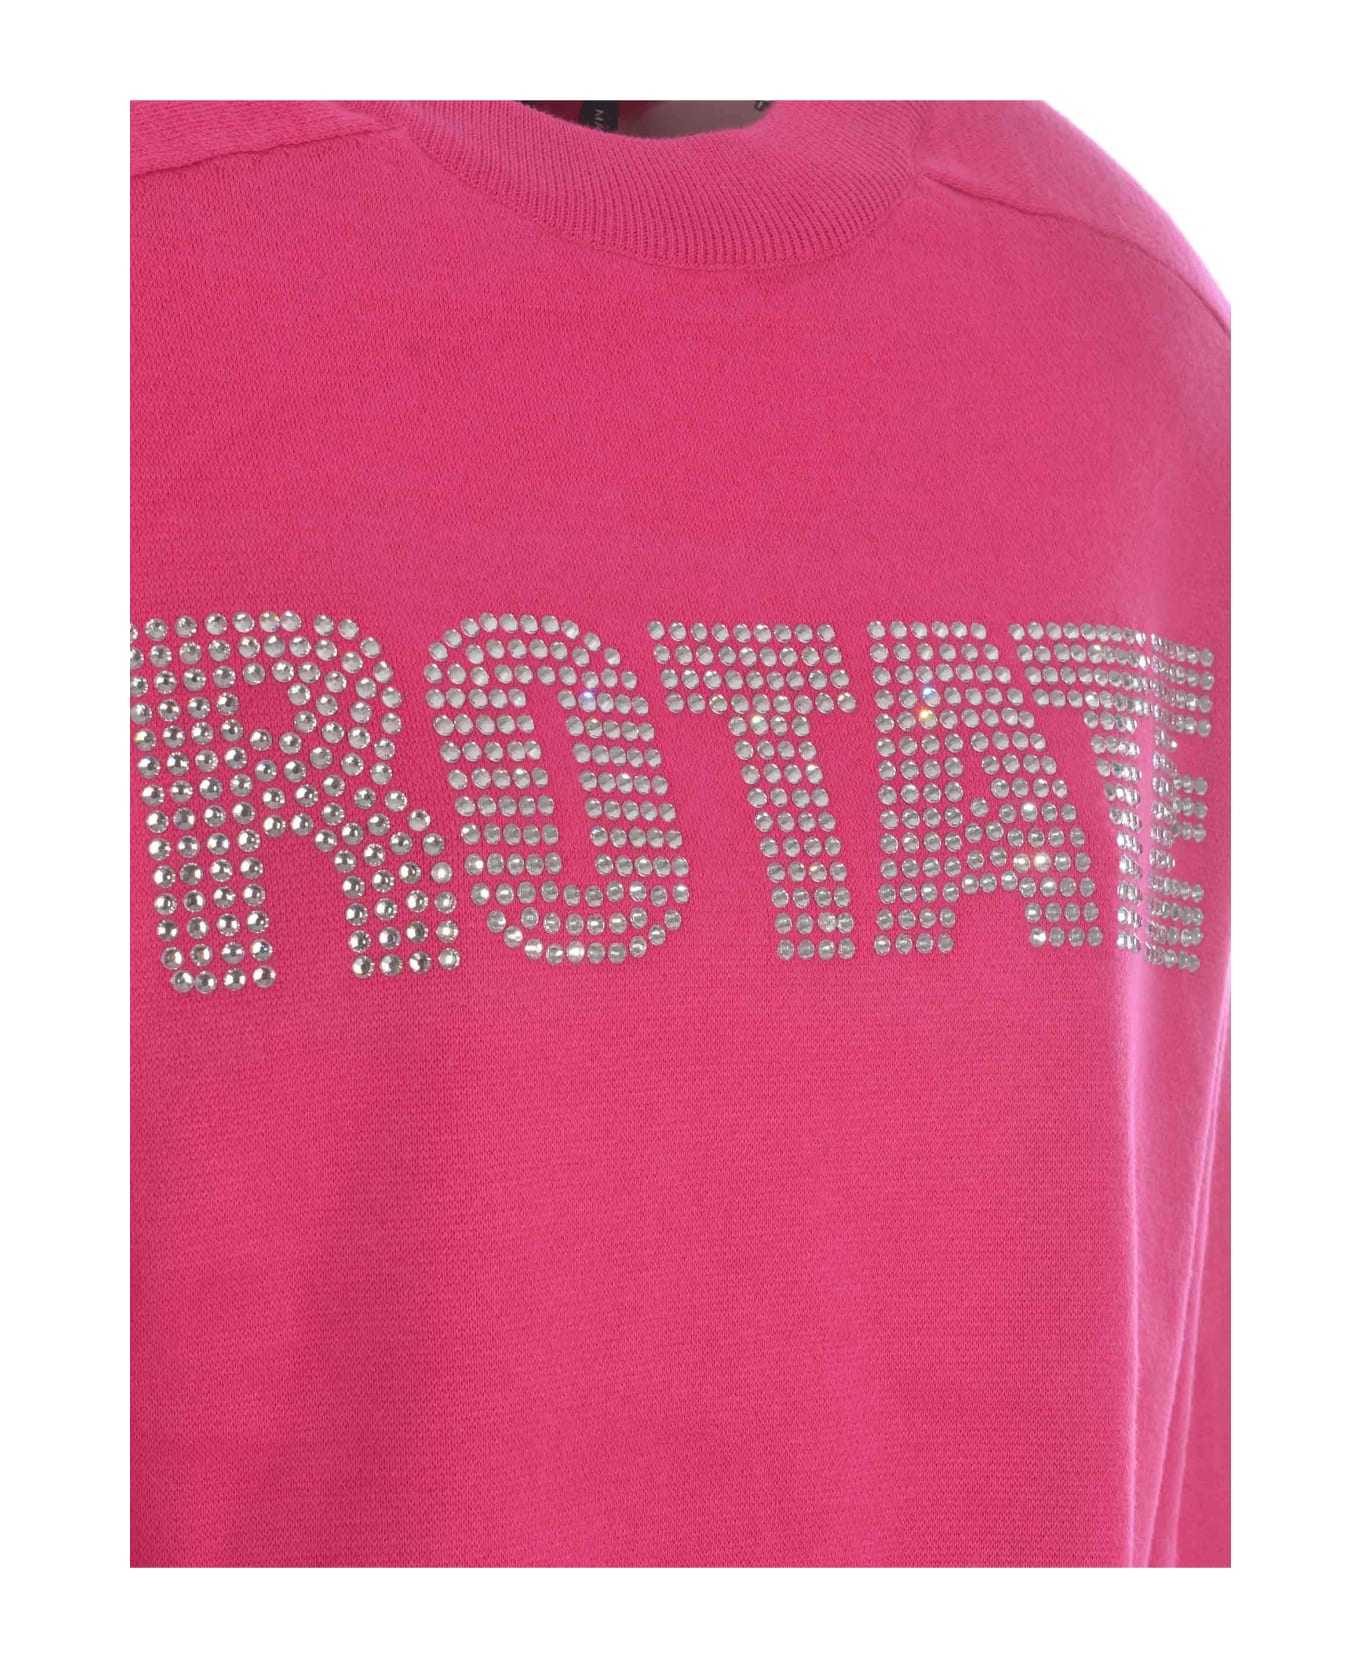 Rotate by Birger Christensen Sweatshirt Rotate In Cotton And Cashmere Blend - Fucsia